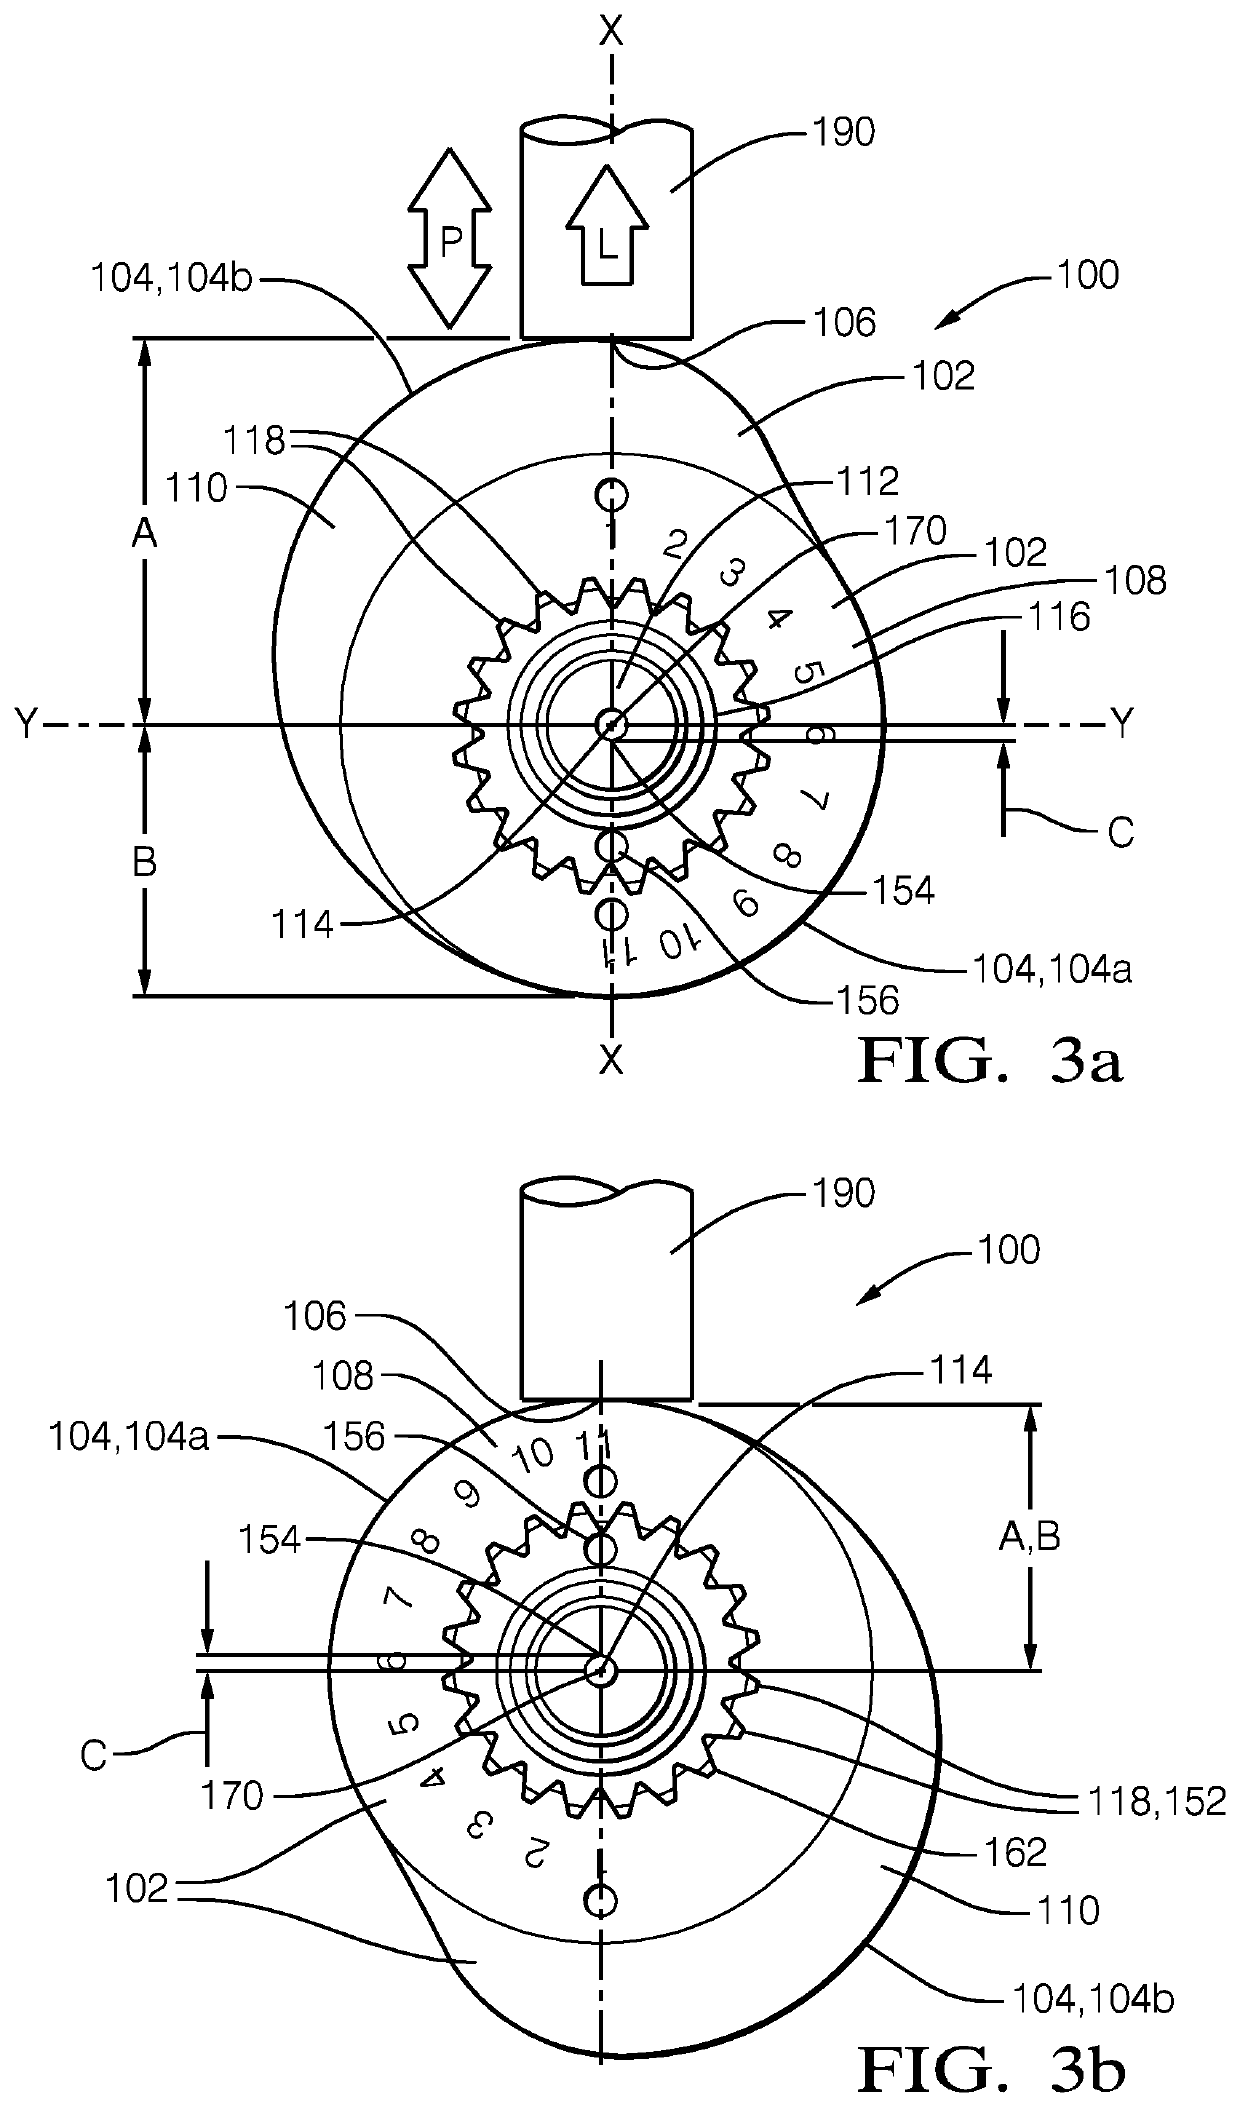 Driveshaft assembly with indexing means